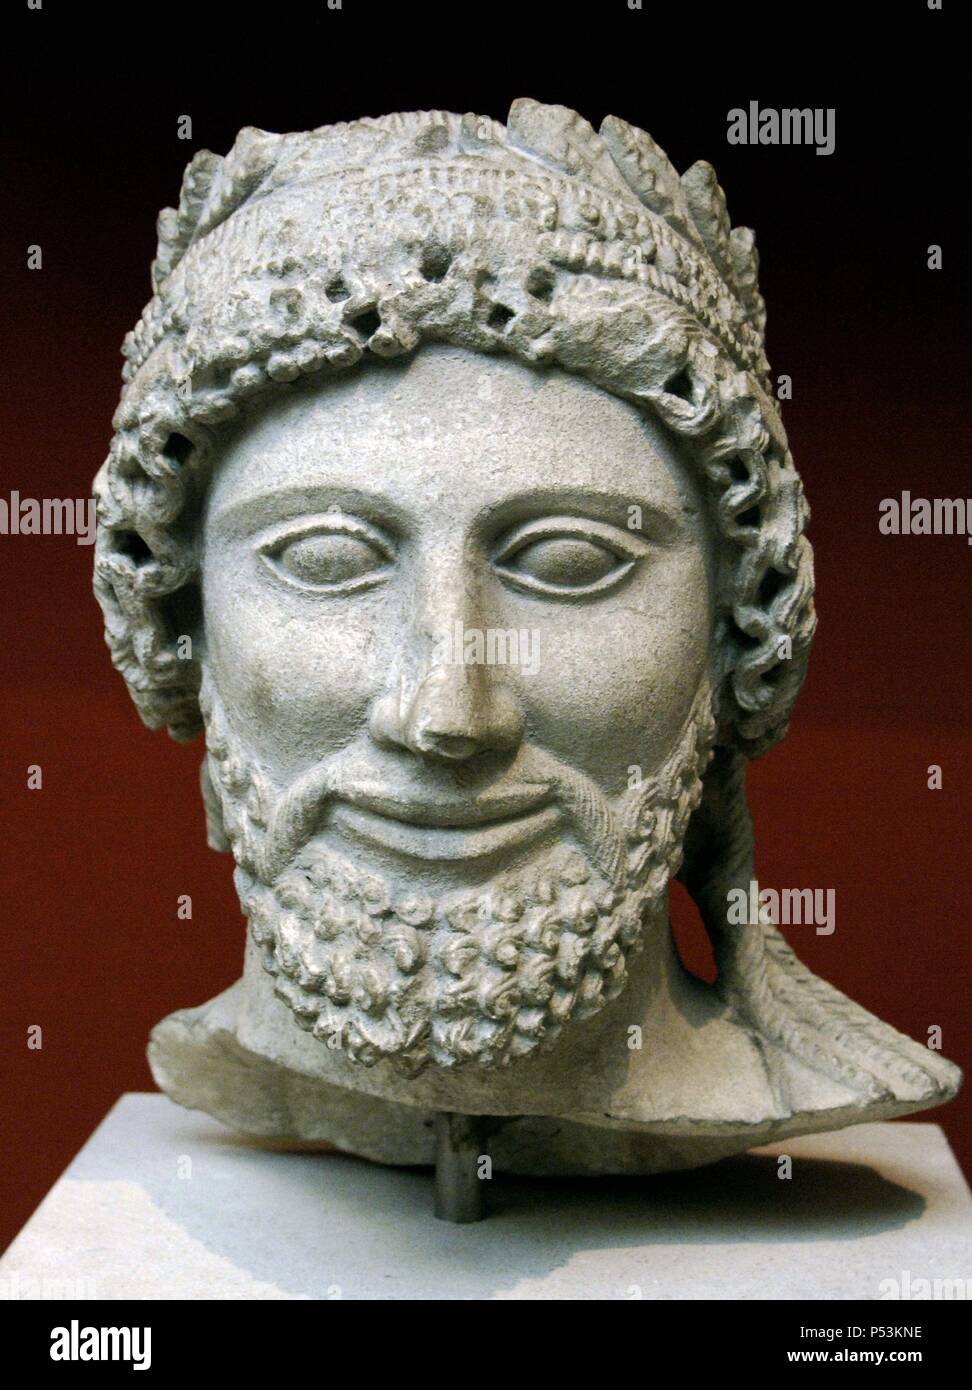 Head from a statue of a bearded man with laurel wreath. Limestone. Sculpted in Cyprus between 475-450 BC. From the Sanctuary of Apollo at Idalion. British Museum. London. England. United Kingdom. Stock Photo